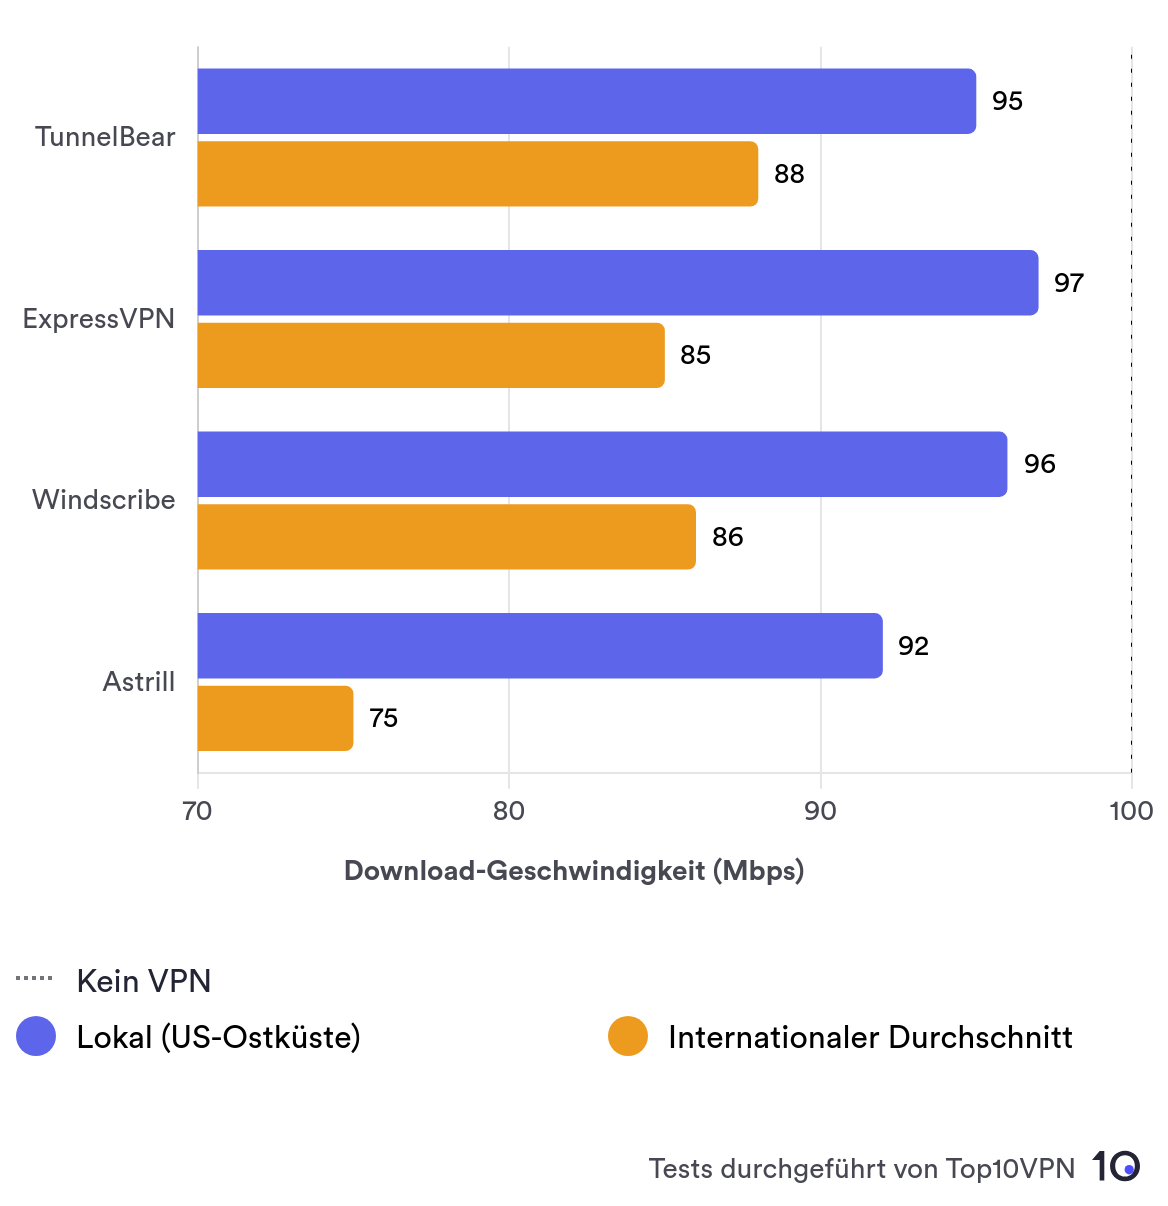 Comparison bar chart showing TunnelBear's local speed performance against other leading VPN services.